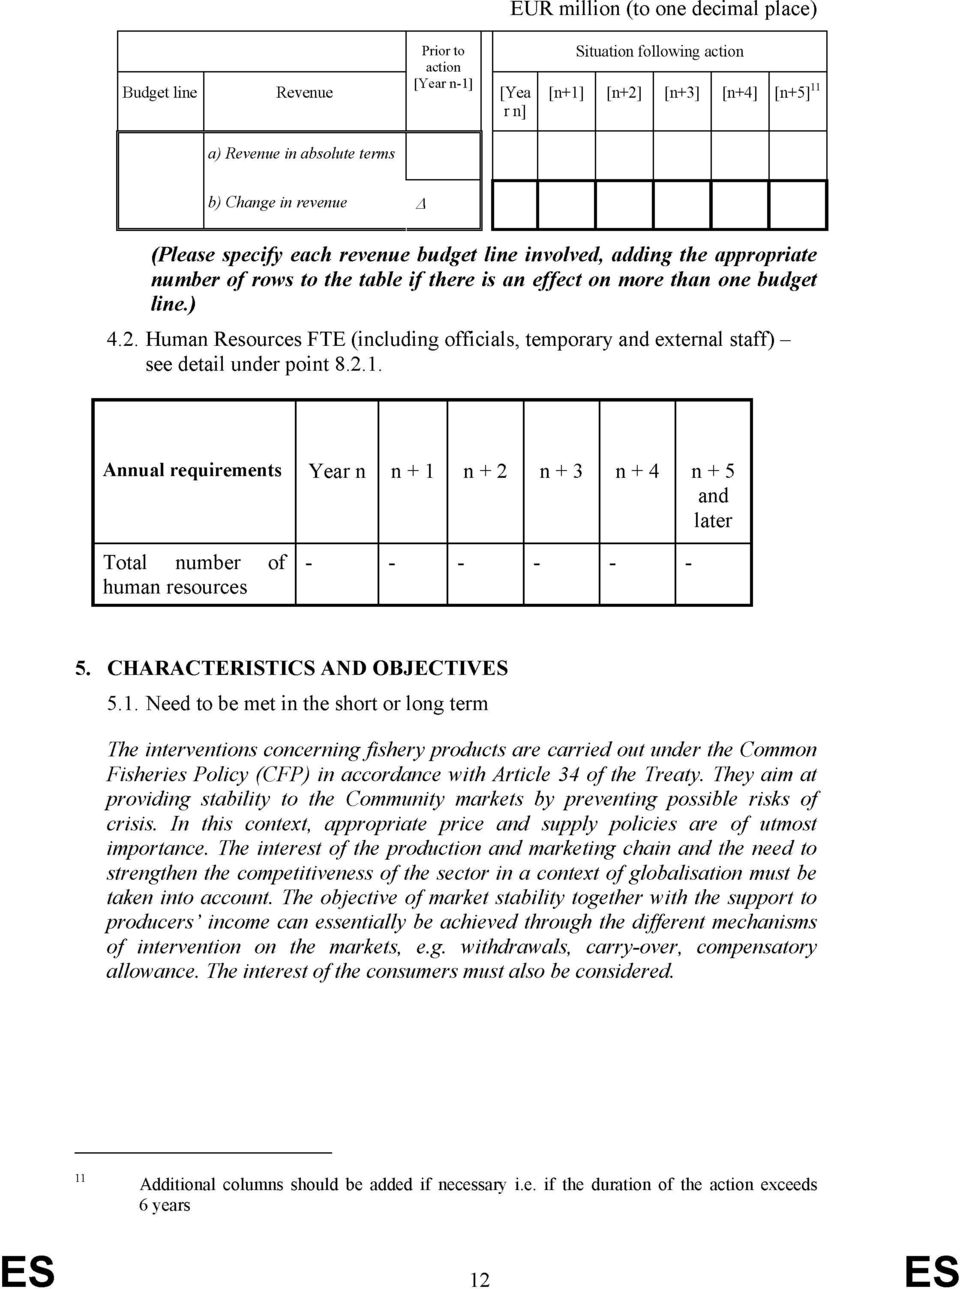 Human Resources FTE (including officials, temporary and external staff) see detail under point 8.2.1. Annual requirements n n + 1 n + 2 n + 3 n + 4 n + 5 and later Total number of human resources 5.